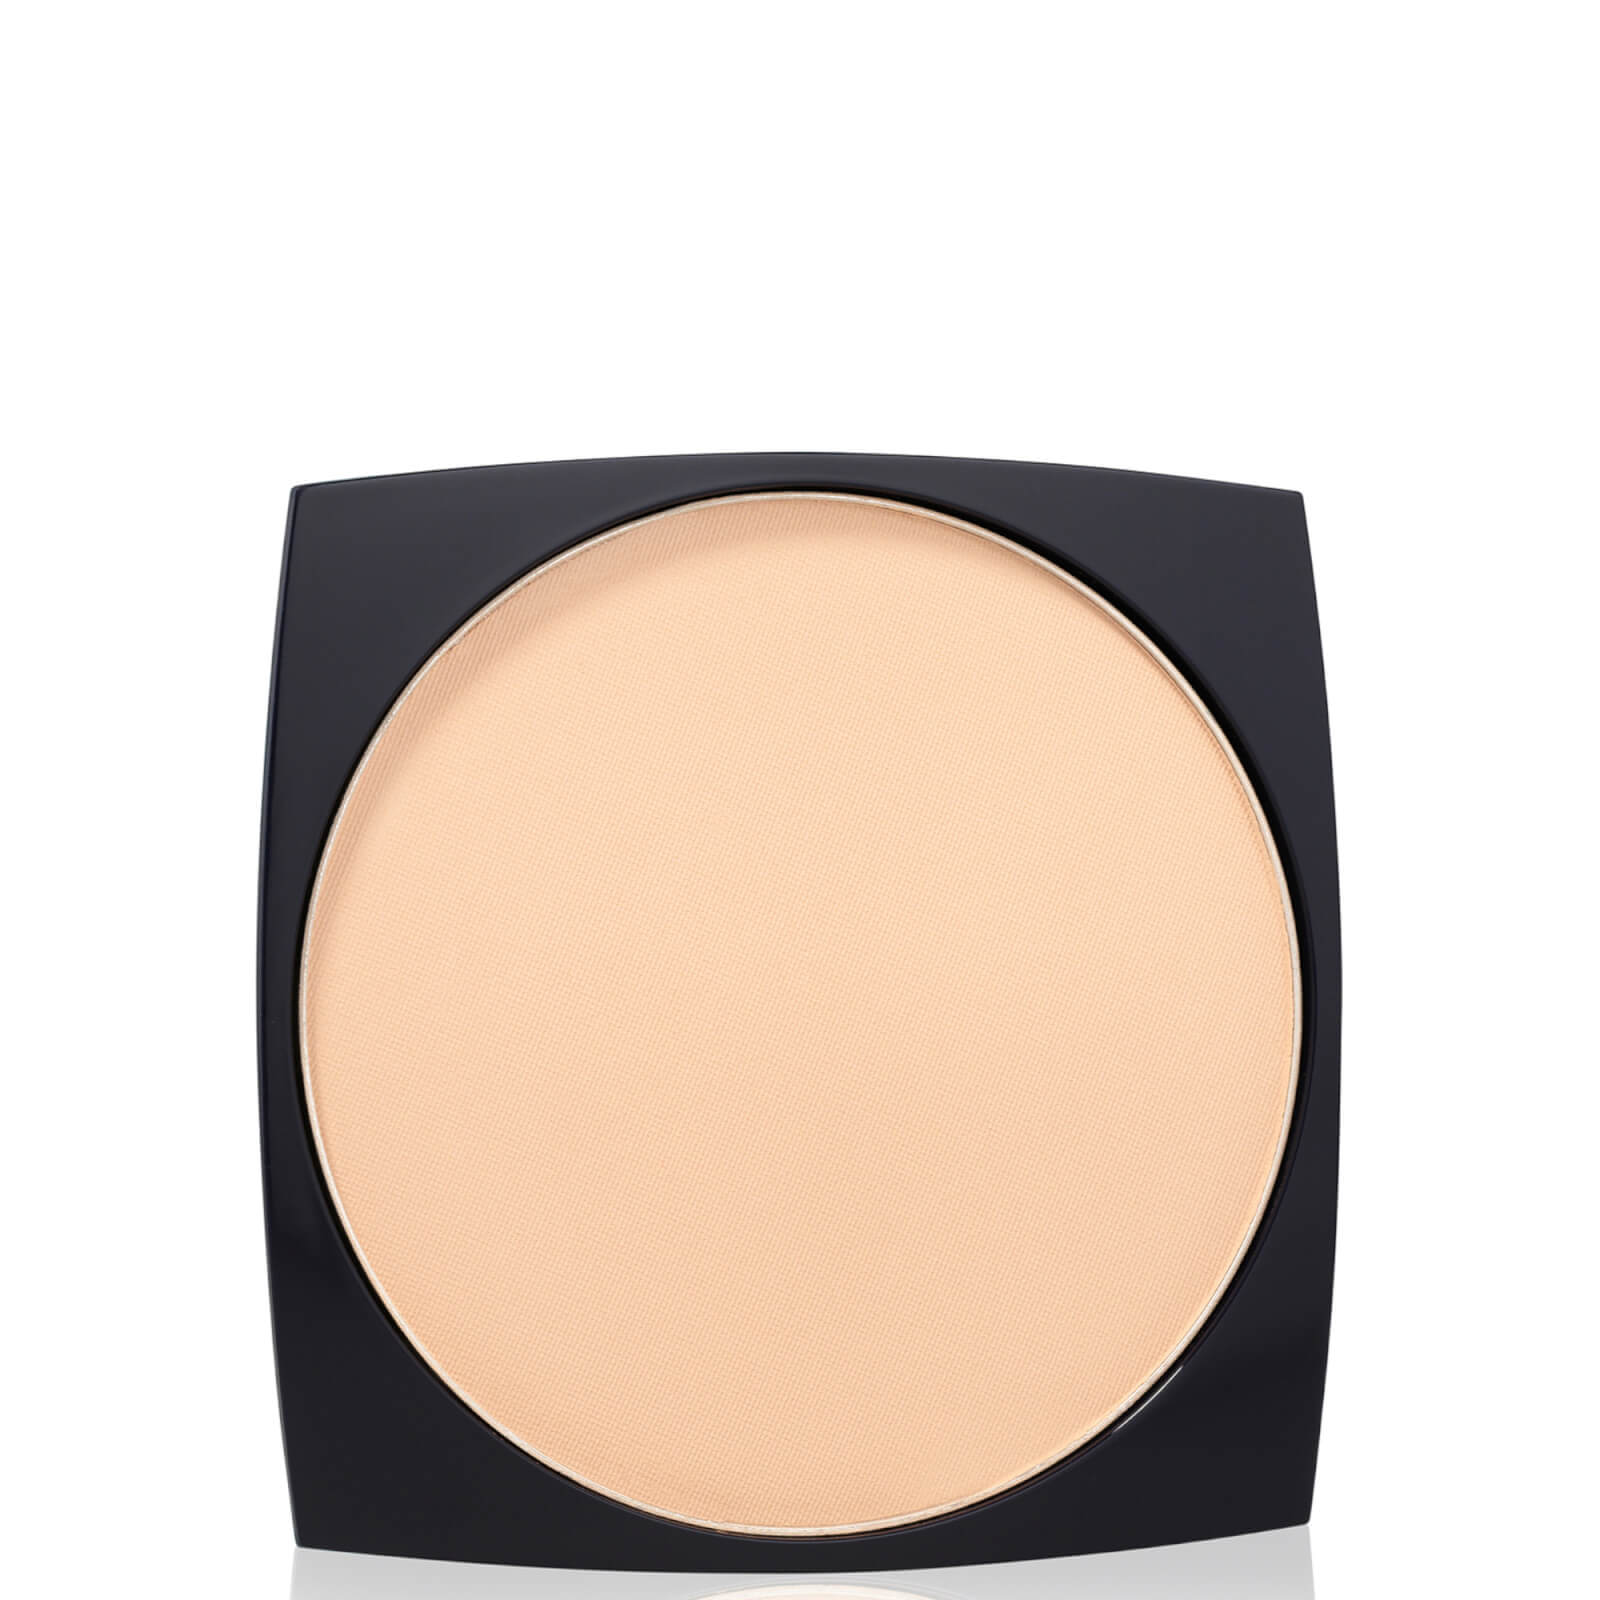 Image of Estée Lauder Double Wear Stay-in-Place Matte Powder Foundation Refill 12g (Various Shades) - 3C2 Pebble